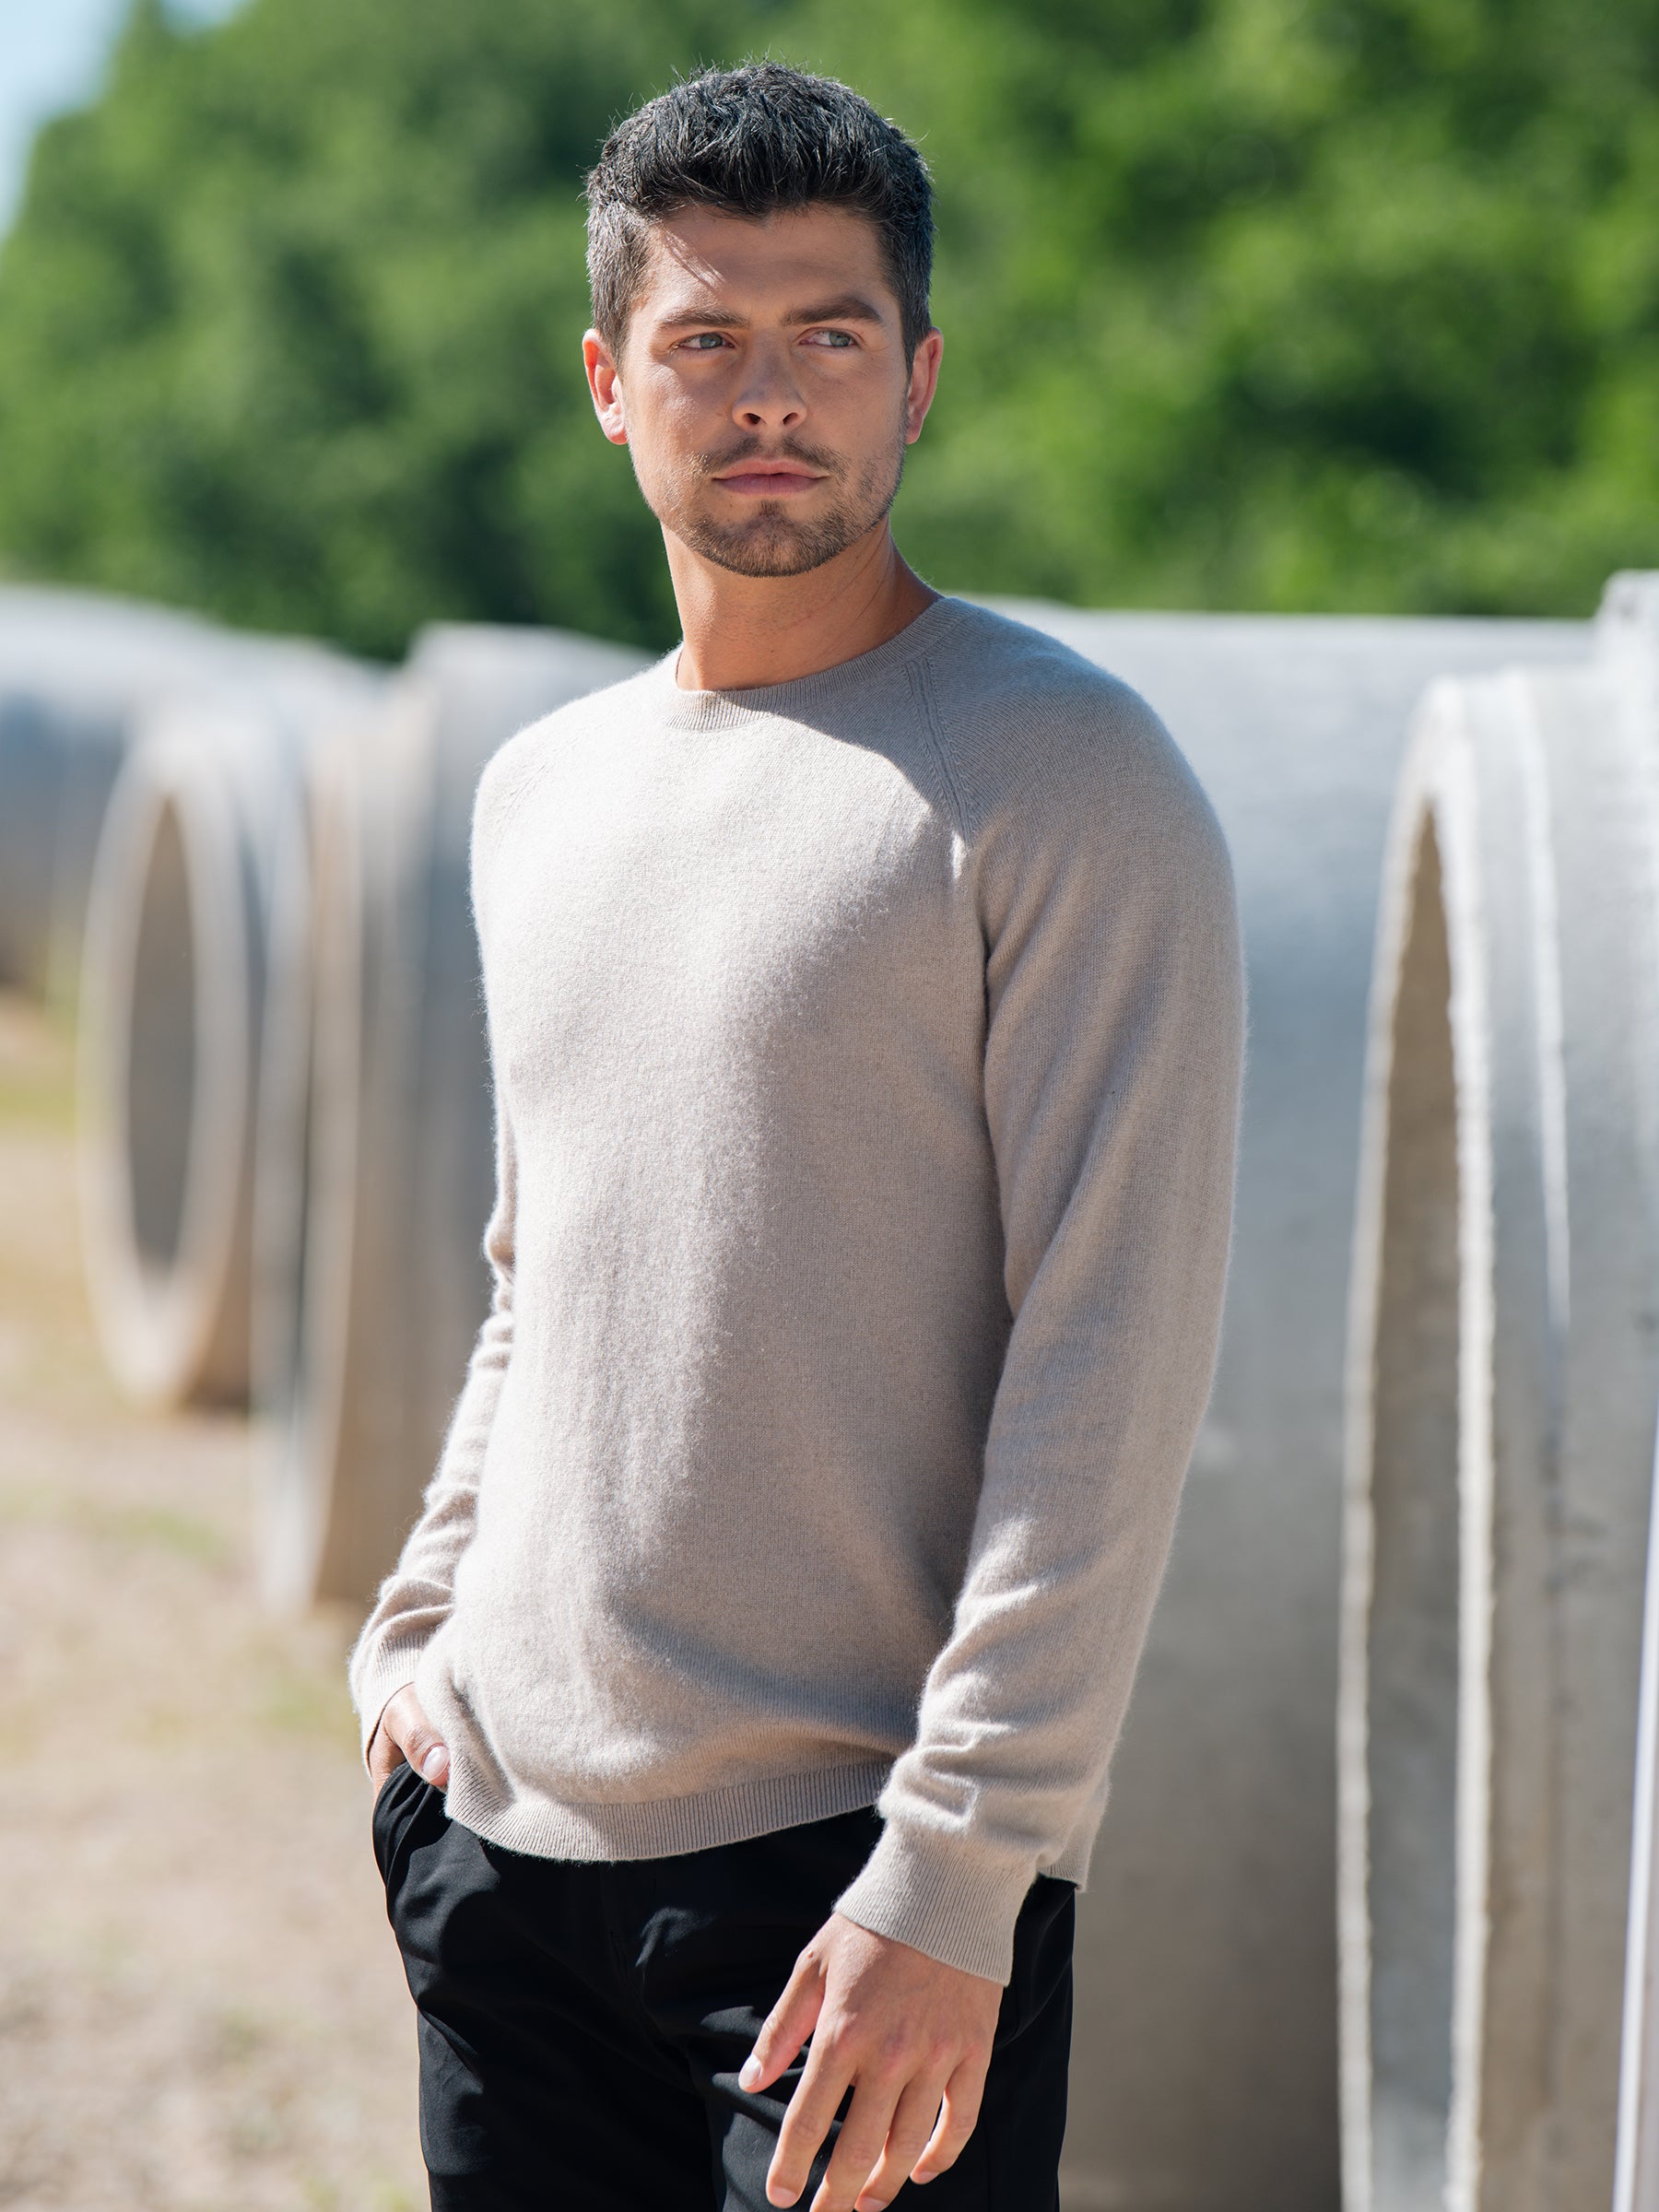 A man with short, dark hair and a trimmed beard is standing outdoors, looking away from the camera. He is wearing a light beige Men's Crewneck Sweater from Cozy Earth and black pants. Large cylindrical pipes are in the blurred background, along with greenery. |Color:Sandstone